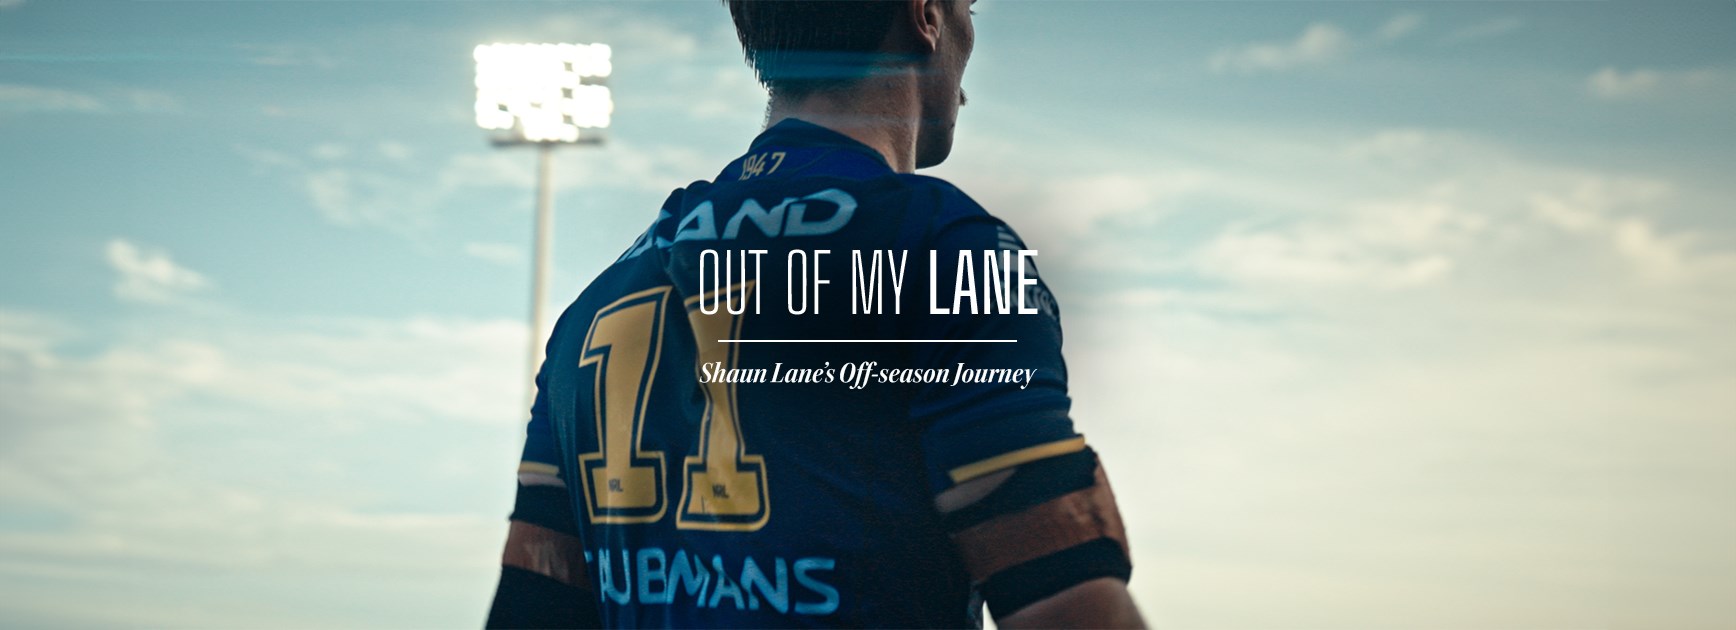 Out of My Lane. Coming soon.